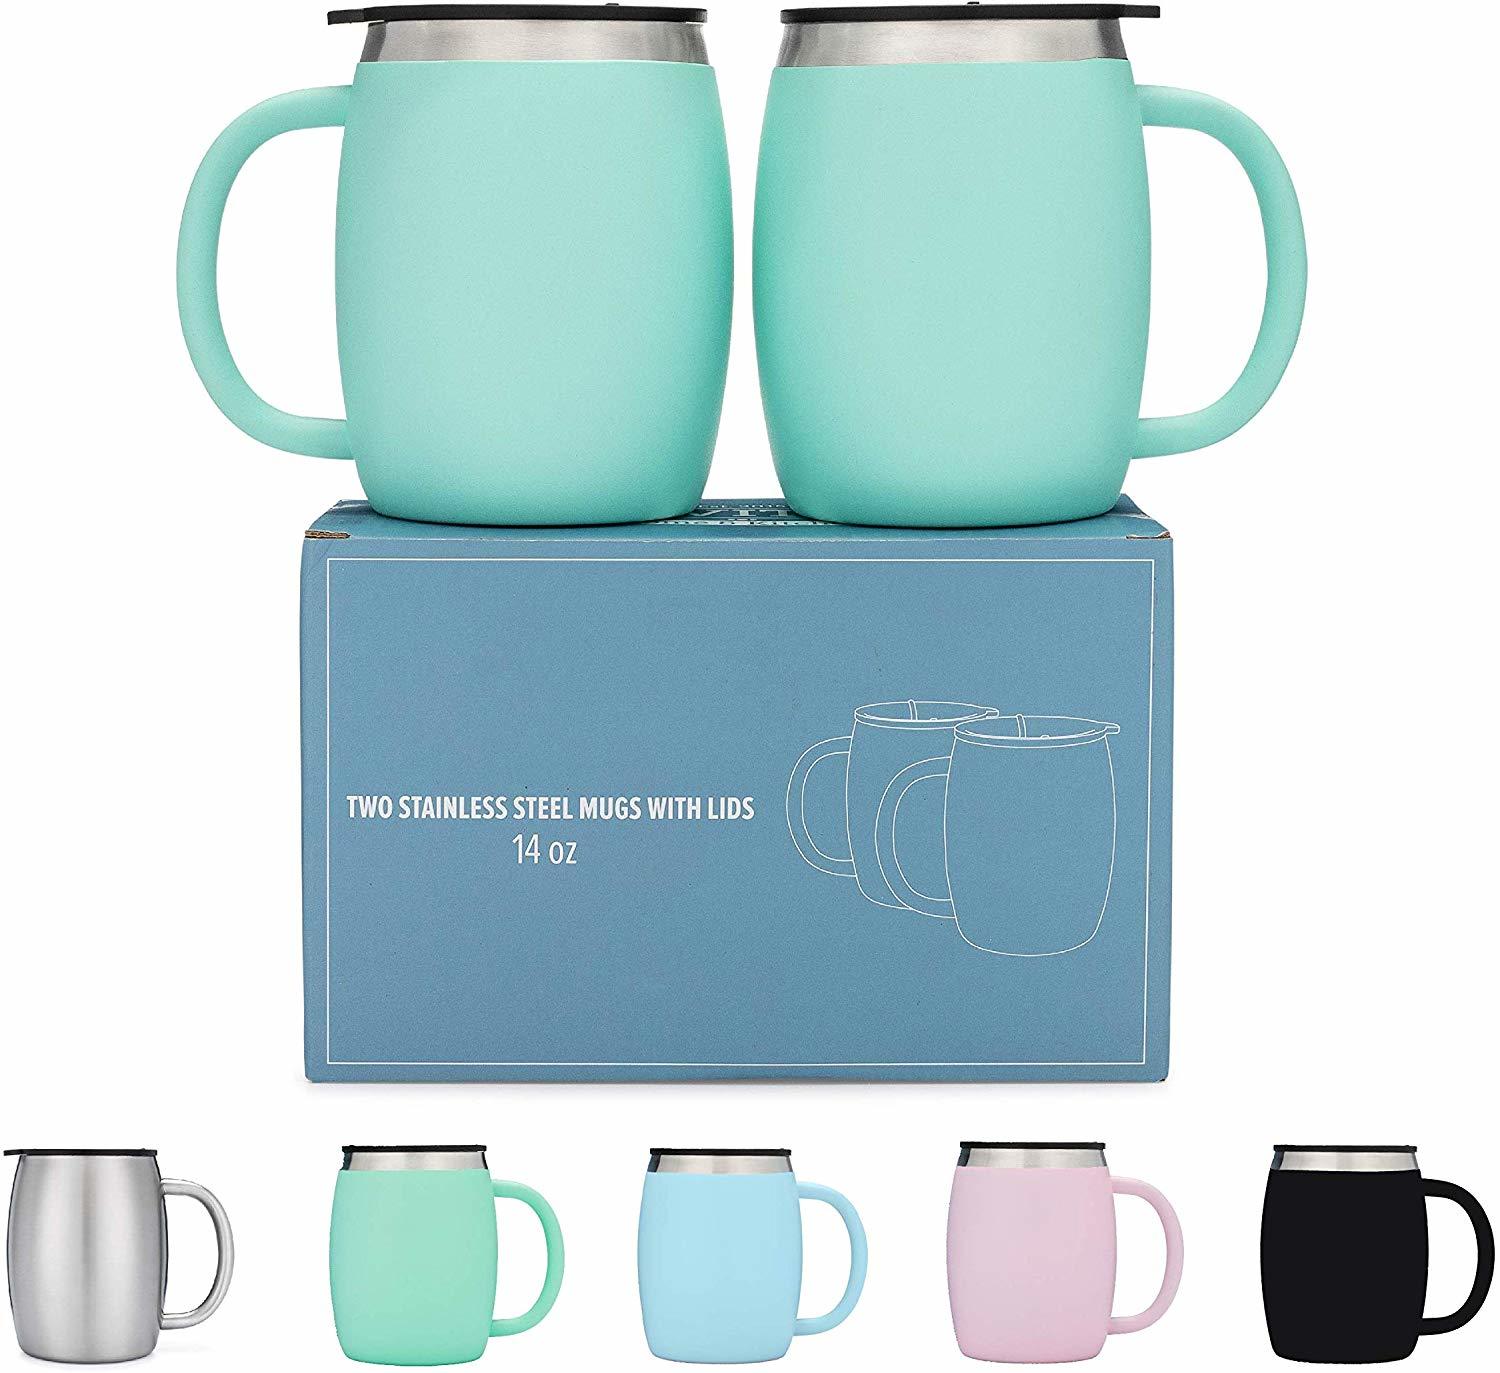 Stainless Steel Insulated Coffee Mugs